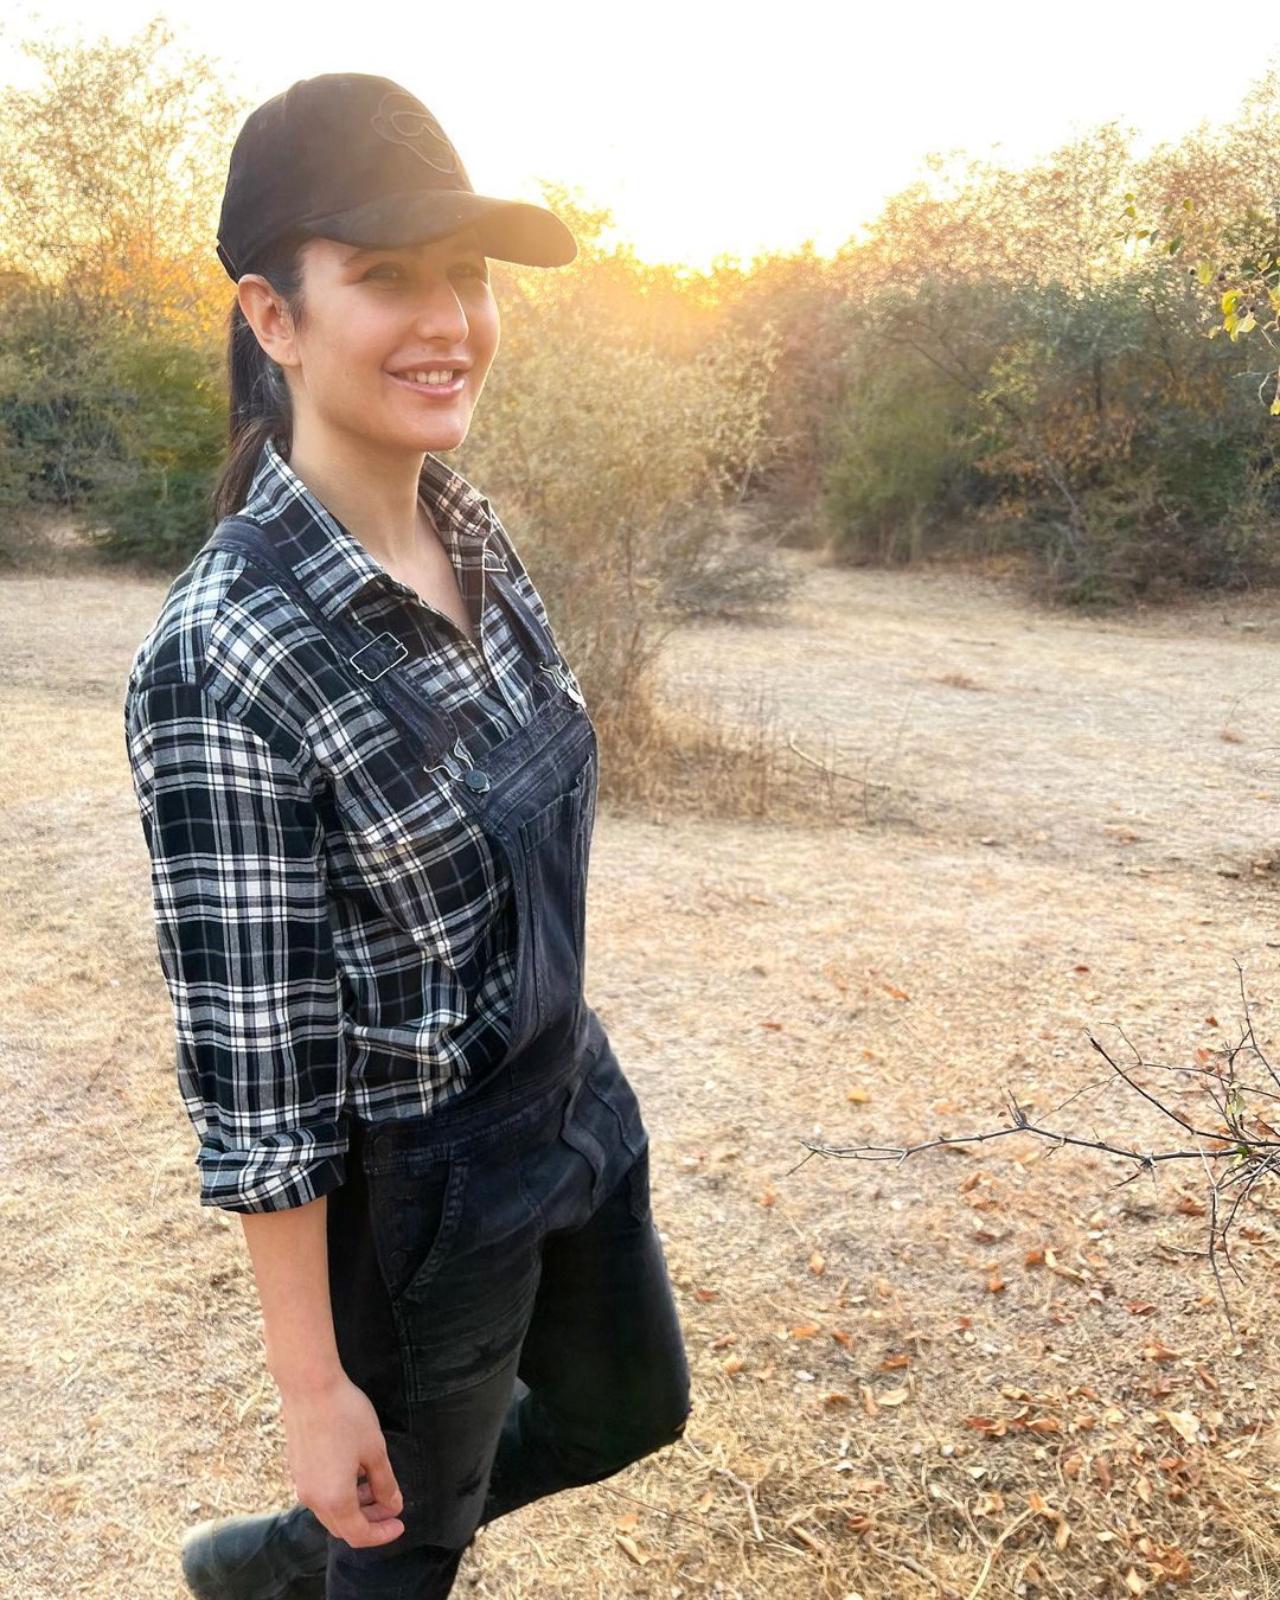 Katrina also shared a solo picture of herself. She is seen in a checked shirt and a black dungaree with a matching cap as she posed against the sun